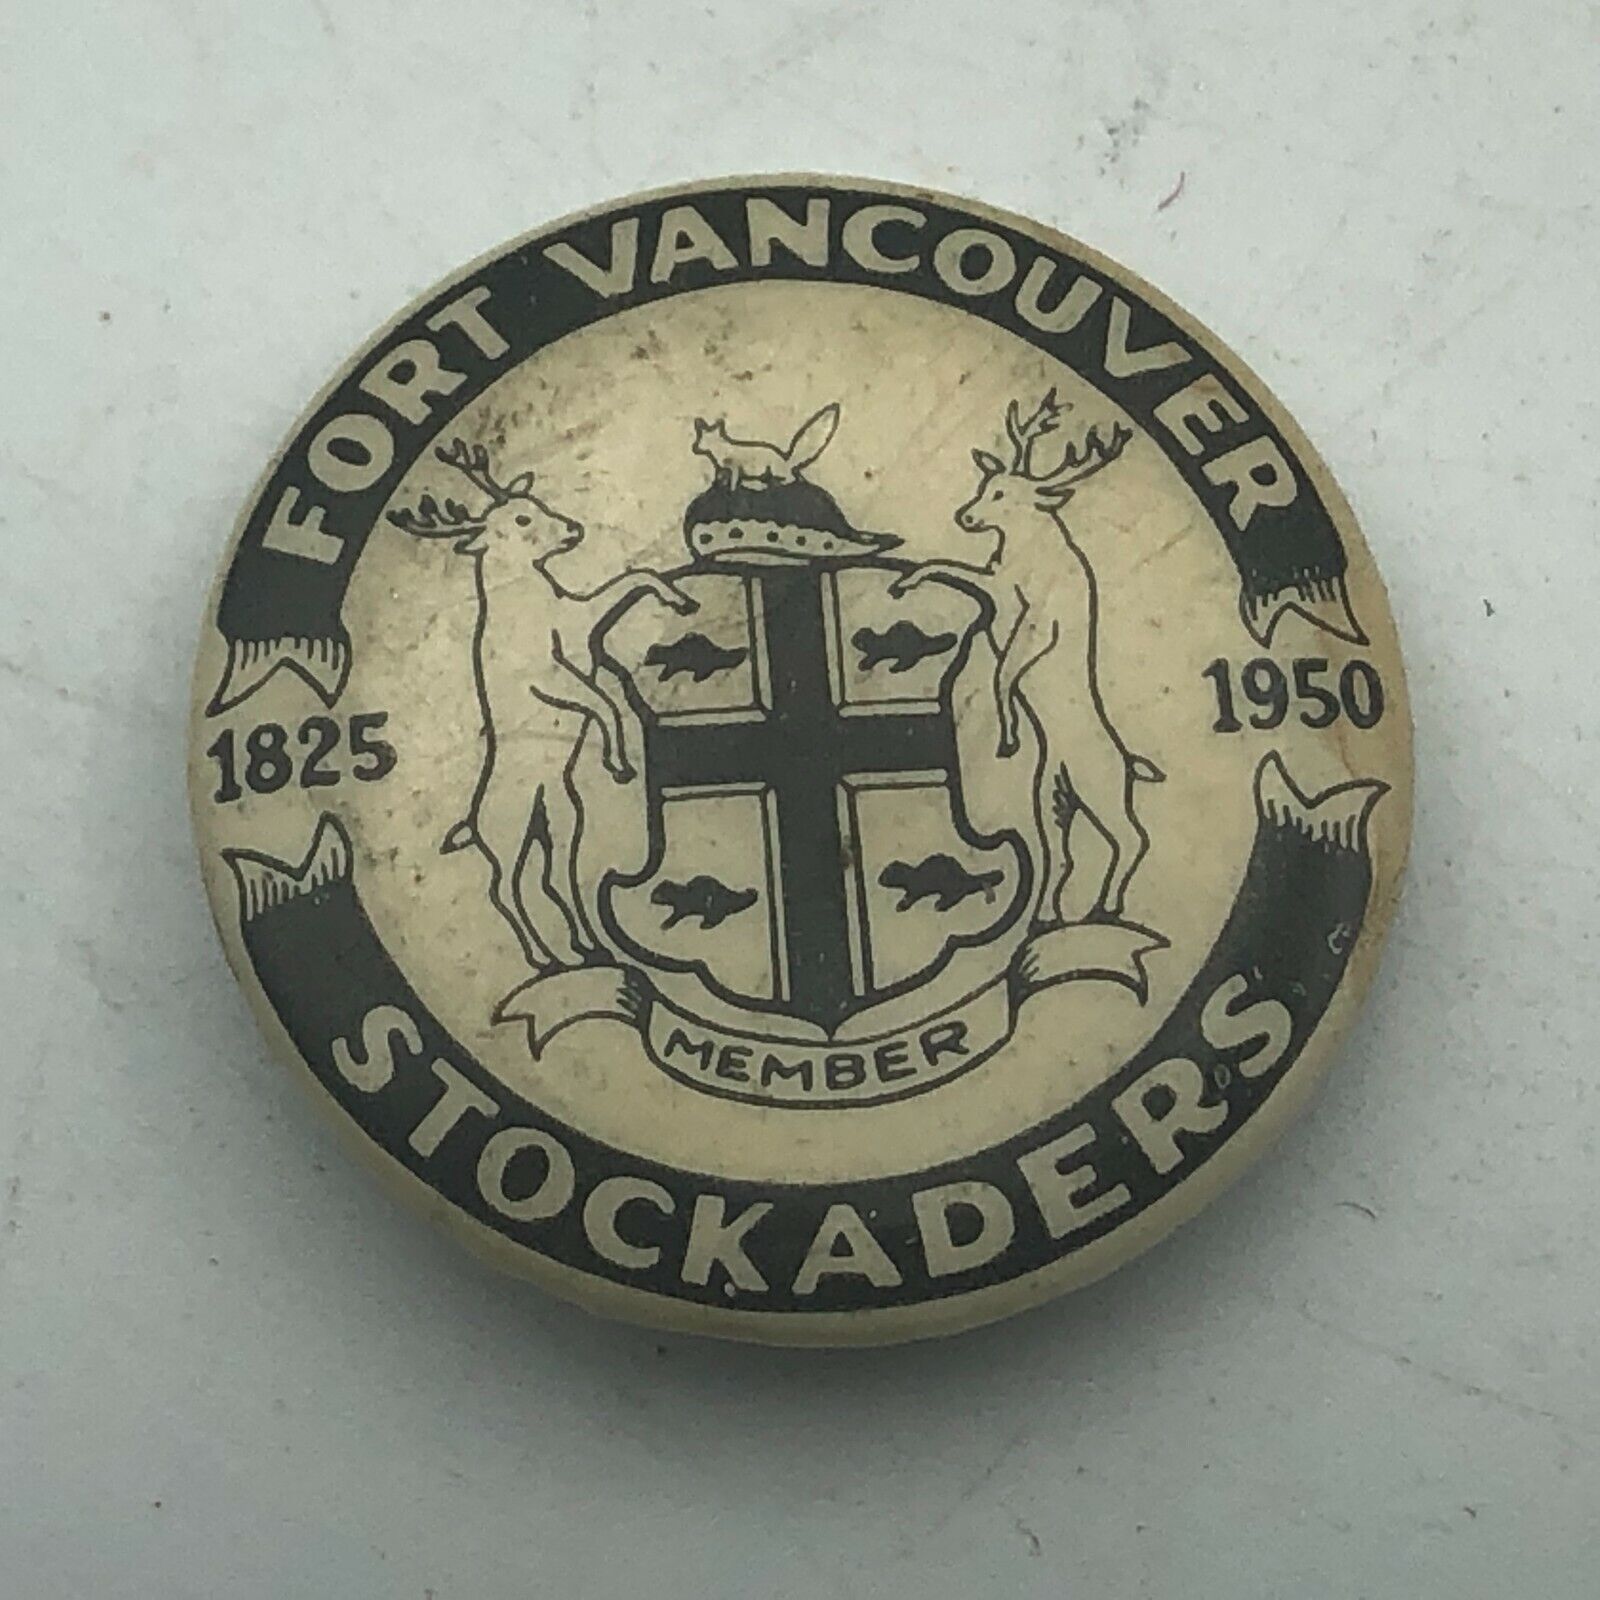 1825-1950 Fort Vancouver Stockaders Member Button Pin Pinback Vintage Rare   F7